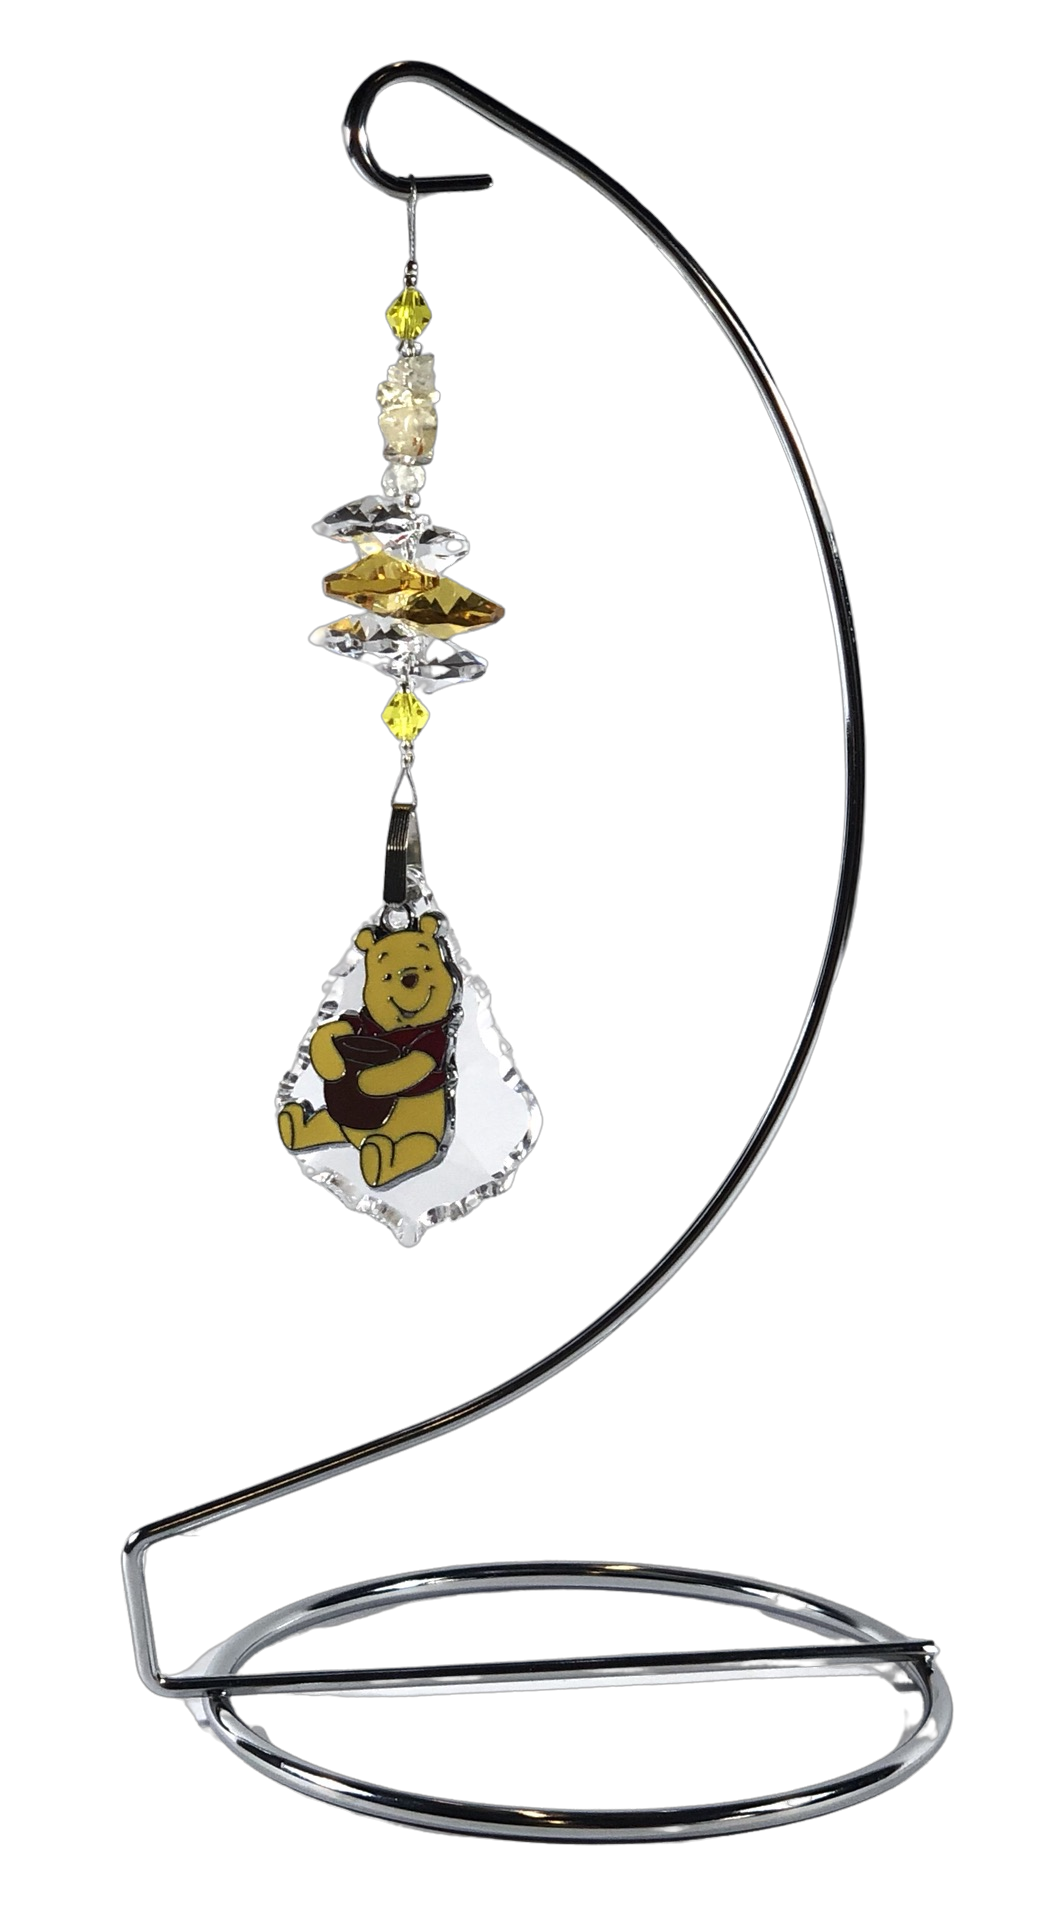 Winnie The Pooh - crystal suncatcher is decorated with citrine gemstones and come on this amazing stand.